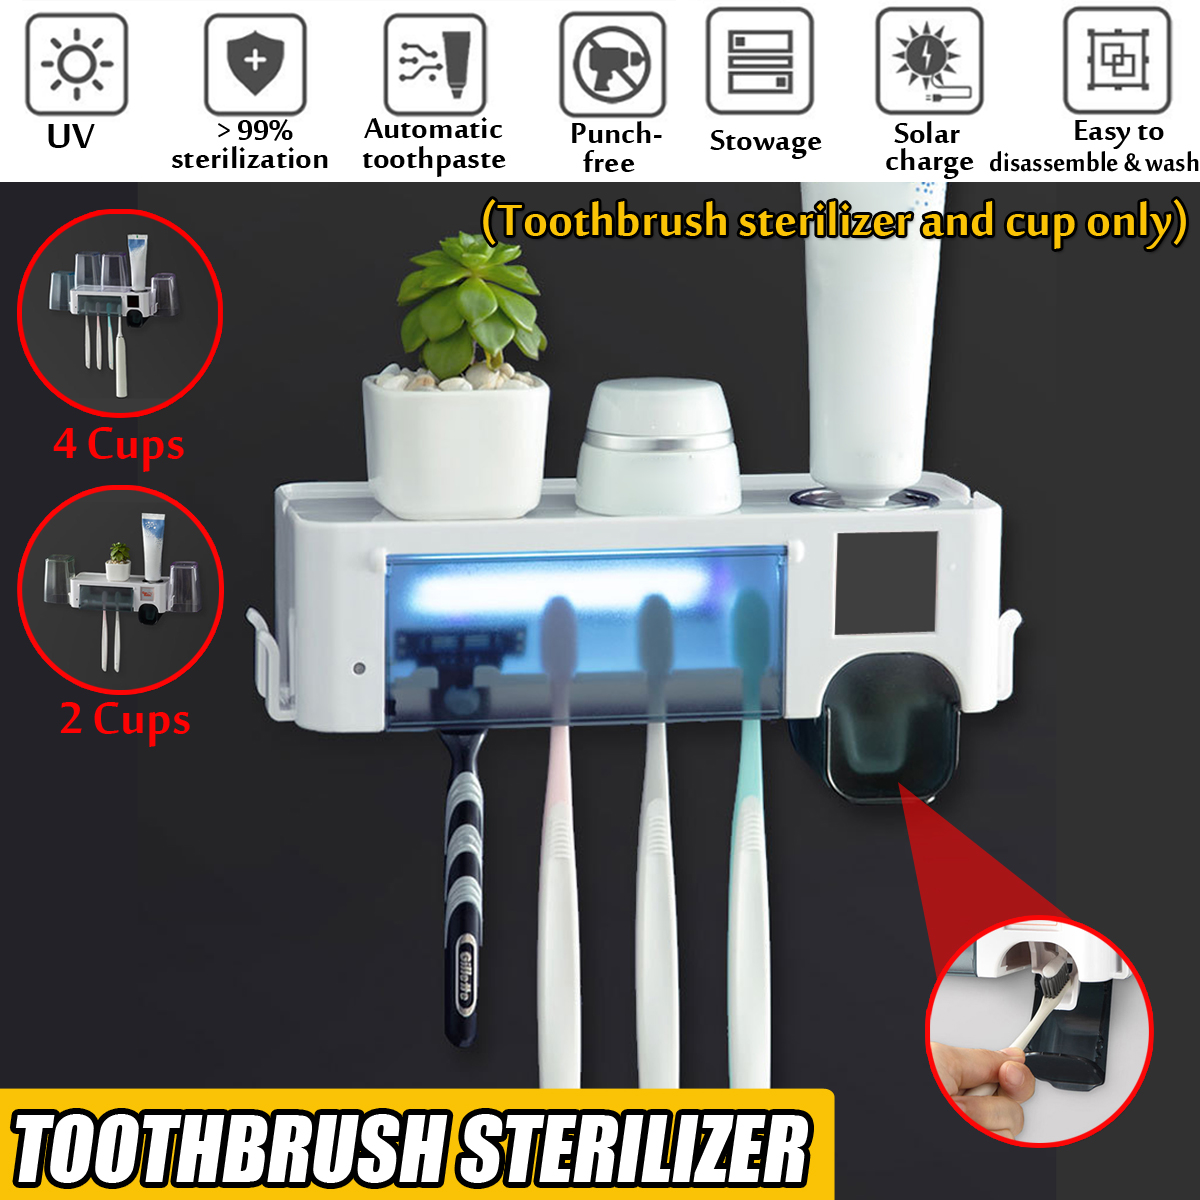 Ultraviolet-Electric-Toothbrush-Sterilizer-Wall-Mount-Toothbrush-Storage-Holder-Automatic-Toothpaste-1681238-1